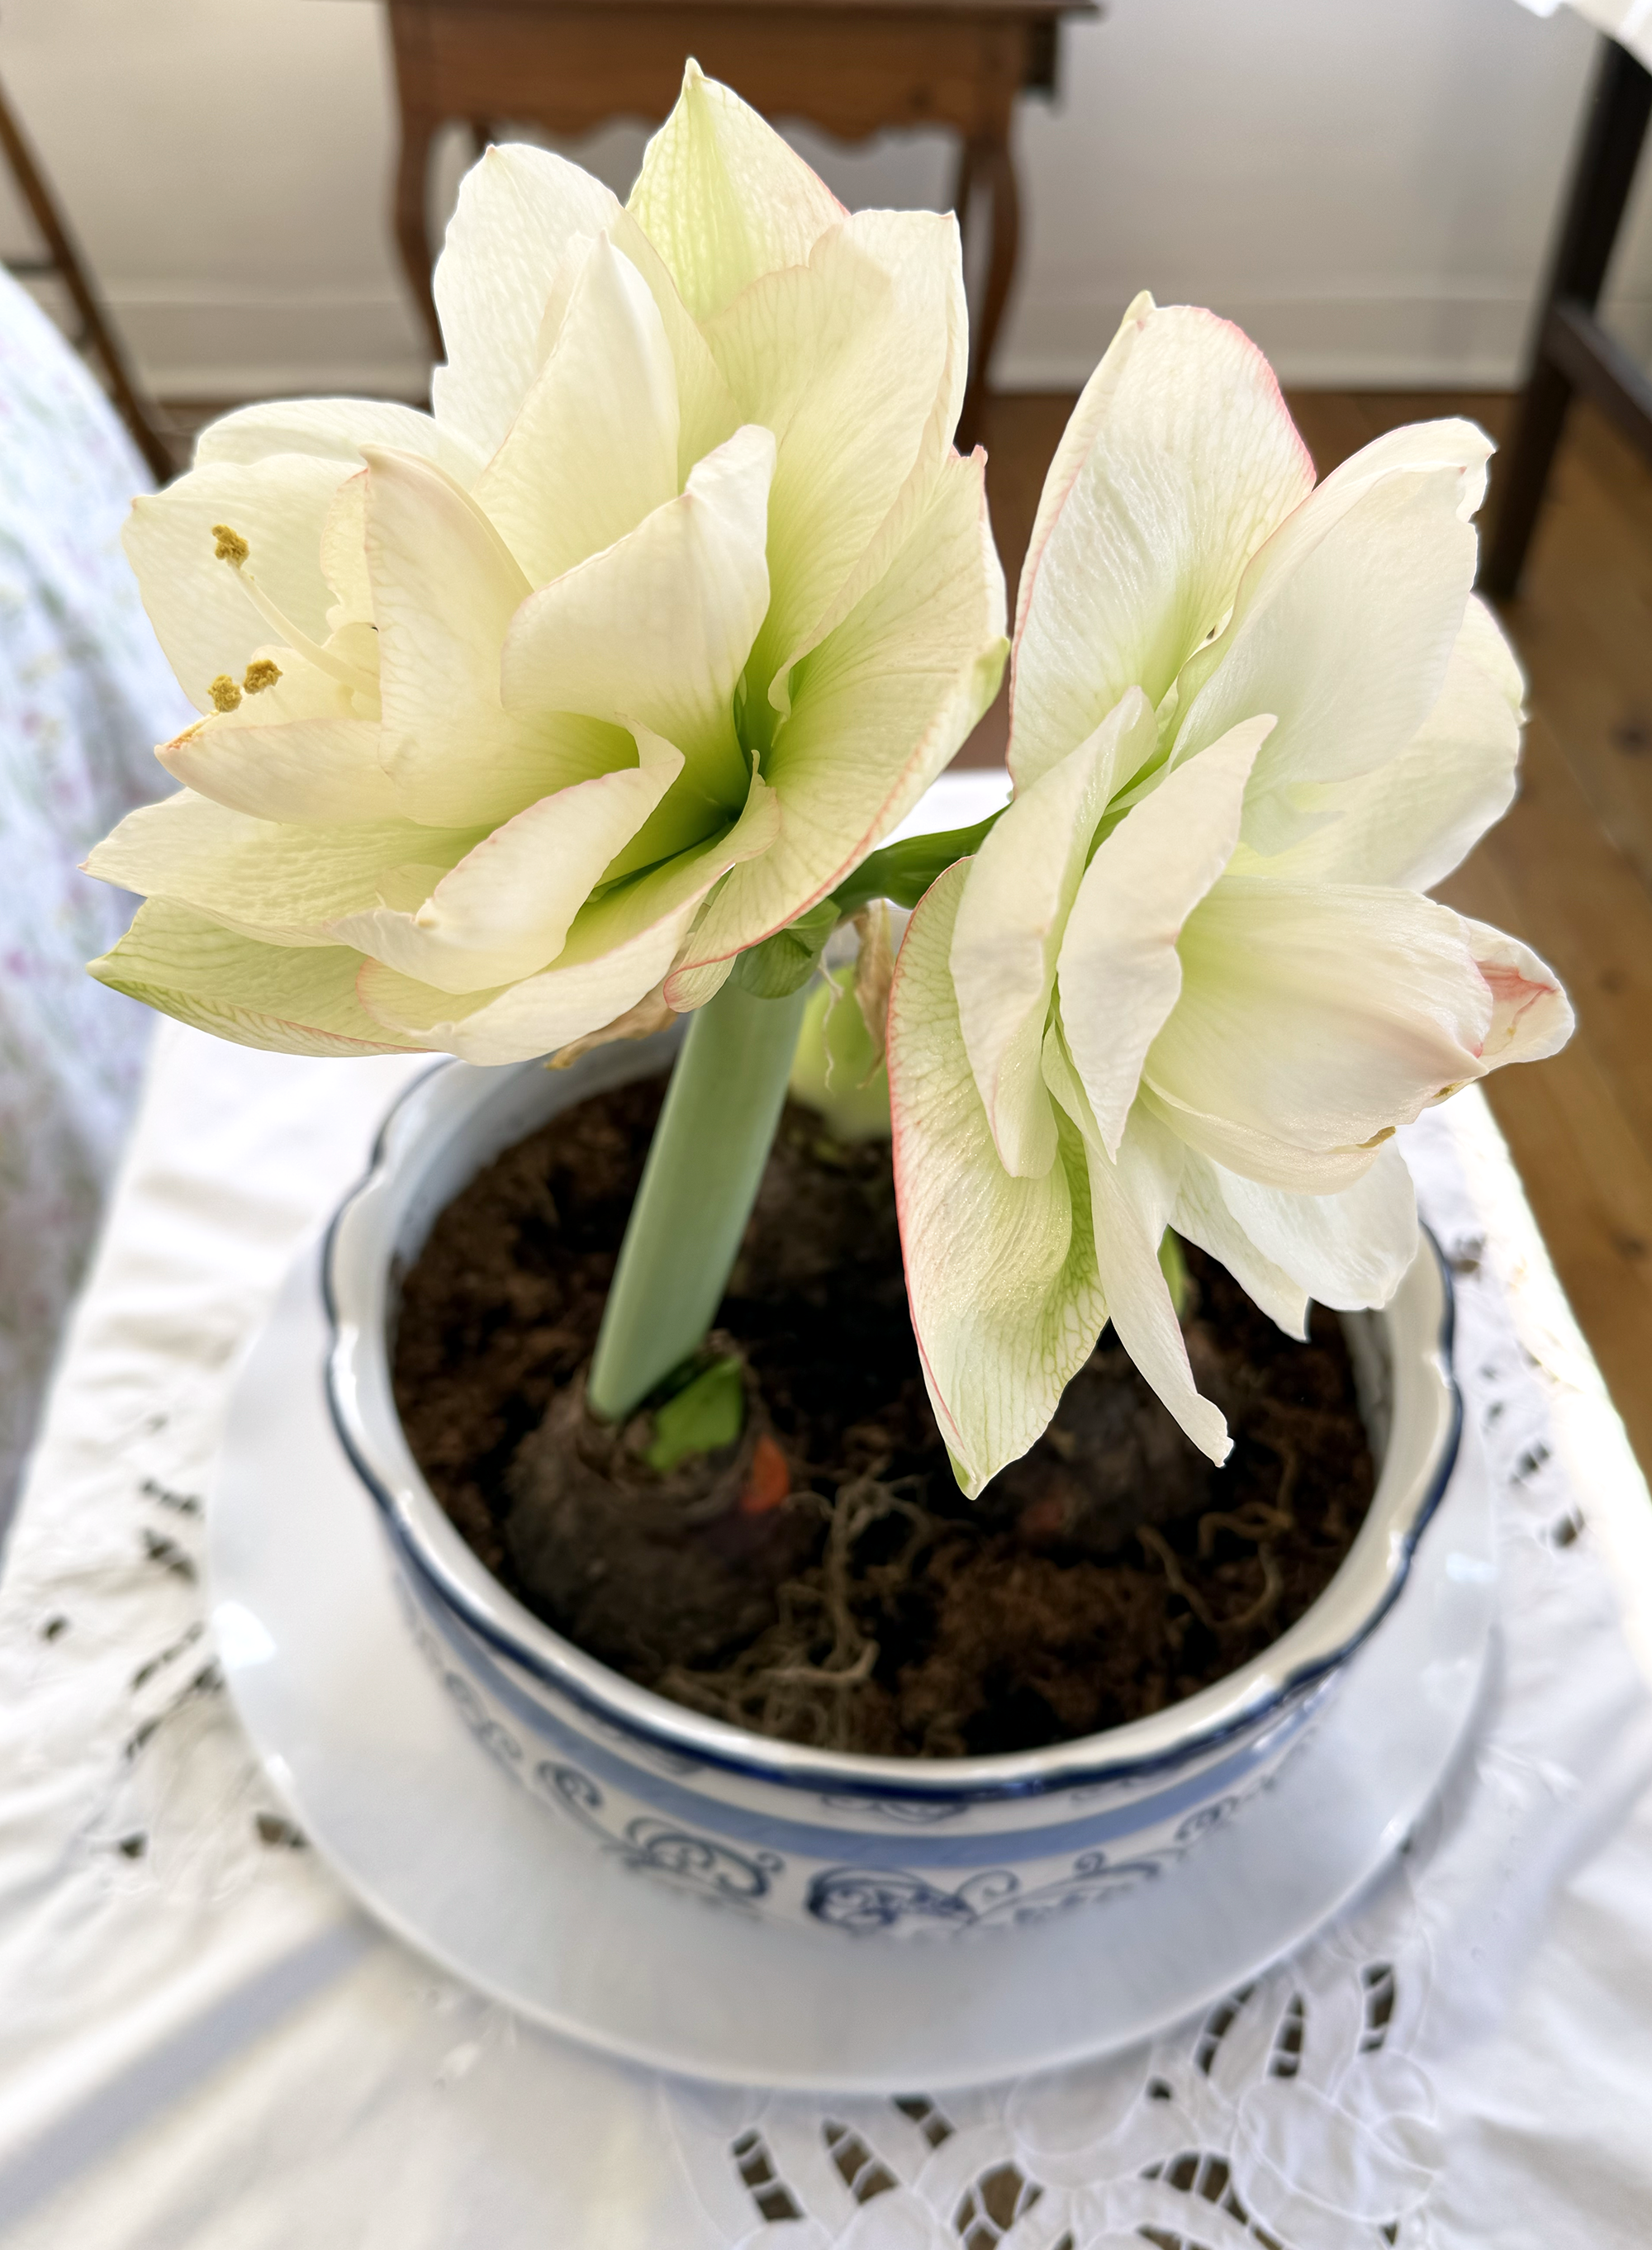 A white amaryllis in full bloom